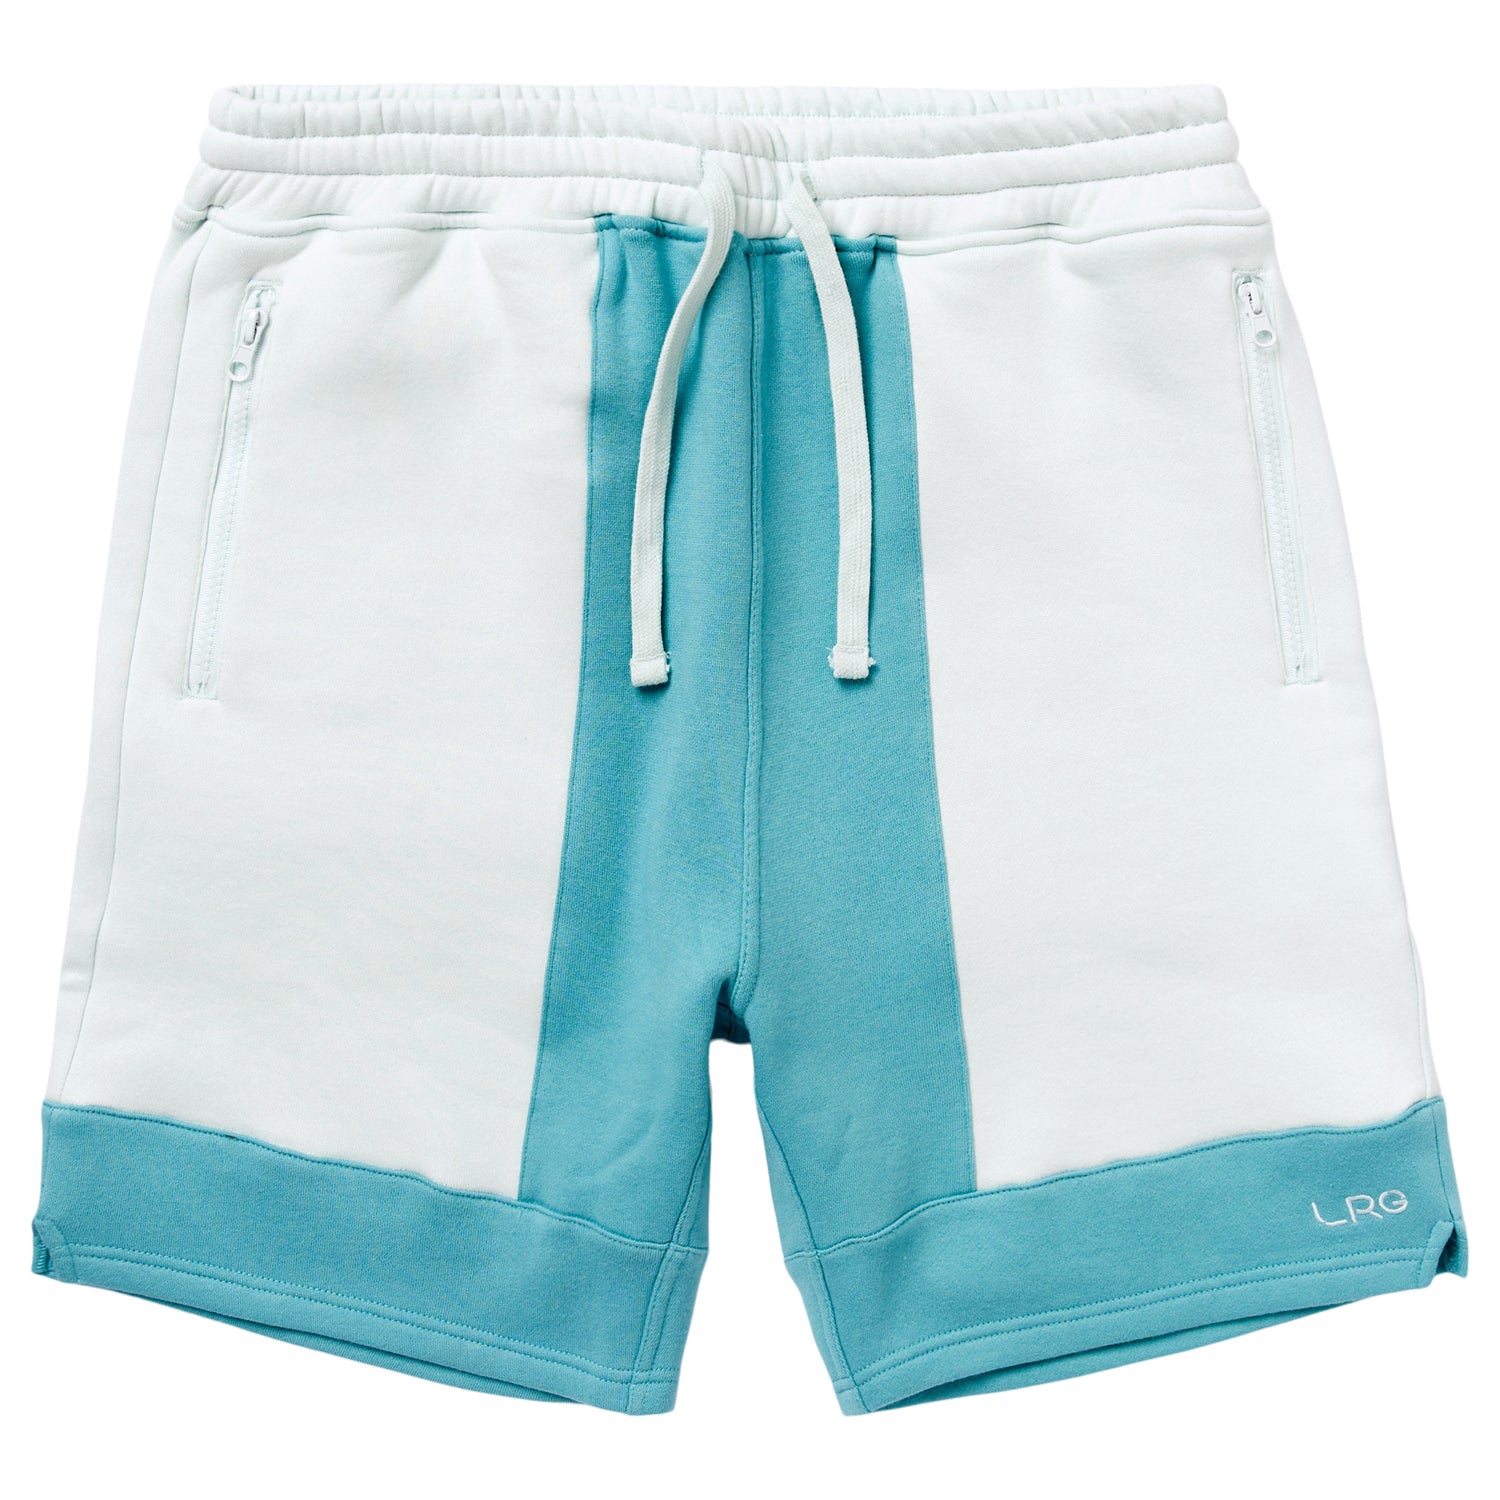 GROOVE SYSTEM SHORTS - BLUE